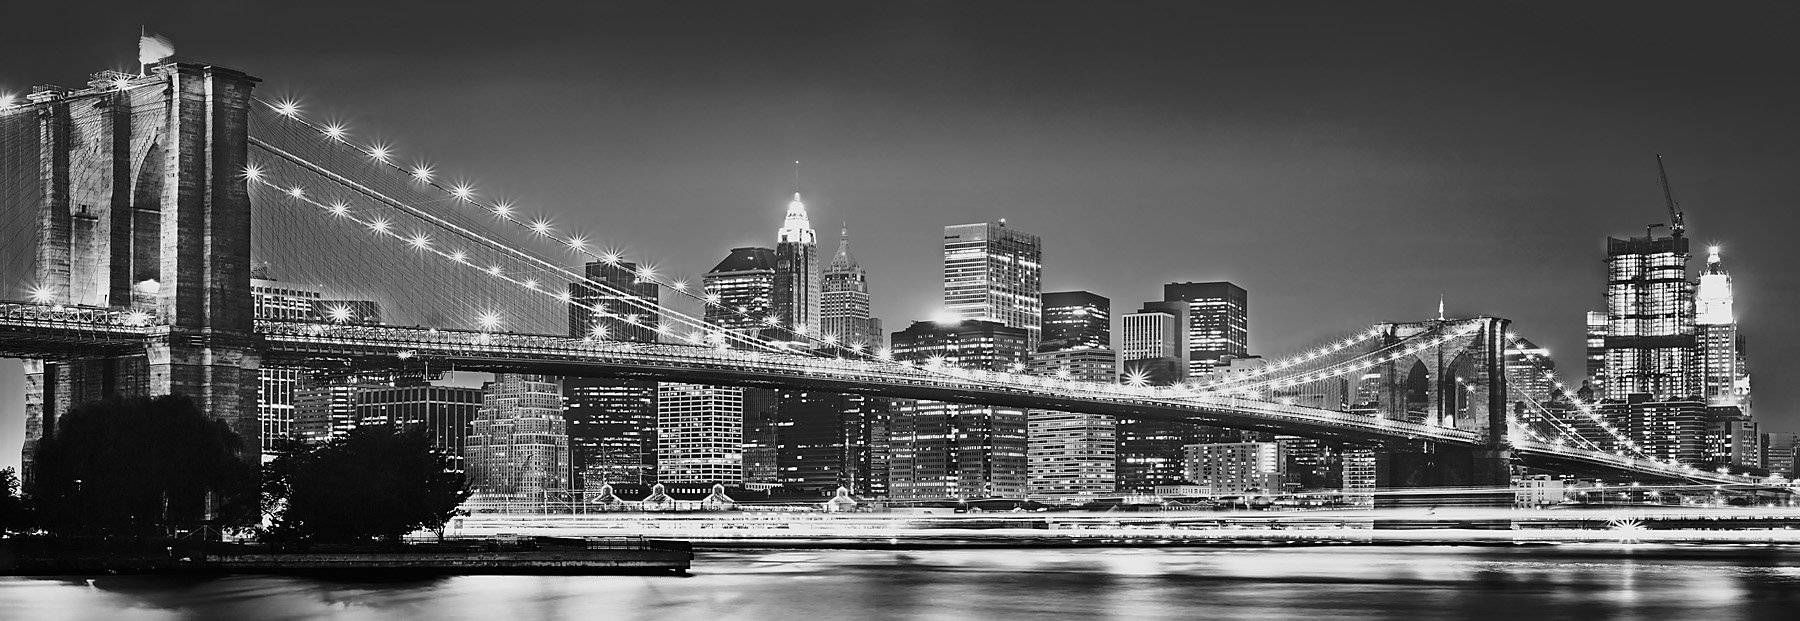 Brewster Home Fashions Komar Brooklyn Bridge Wall Mural & Reviews Within Most Up To Date Brooklyn Bridge Wall Decals (View 17 of 25)